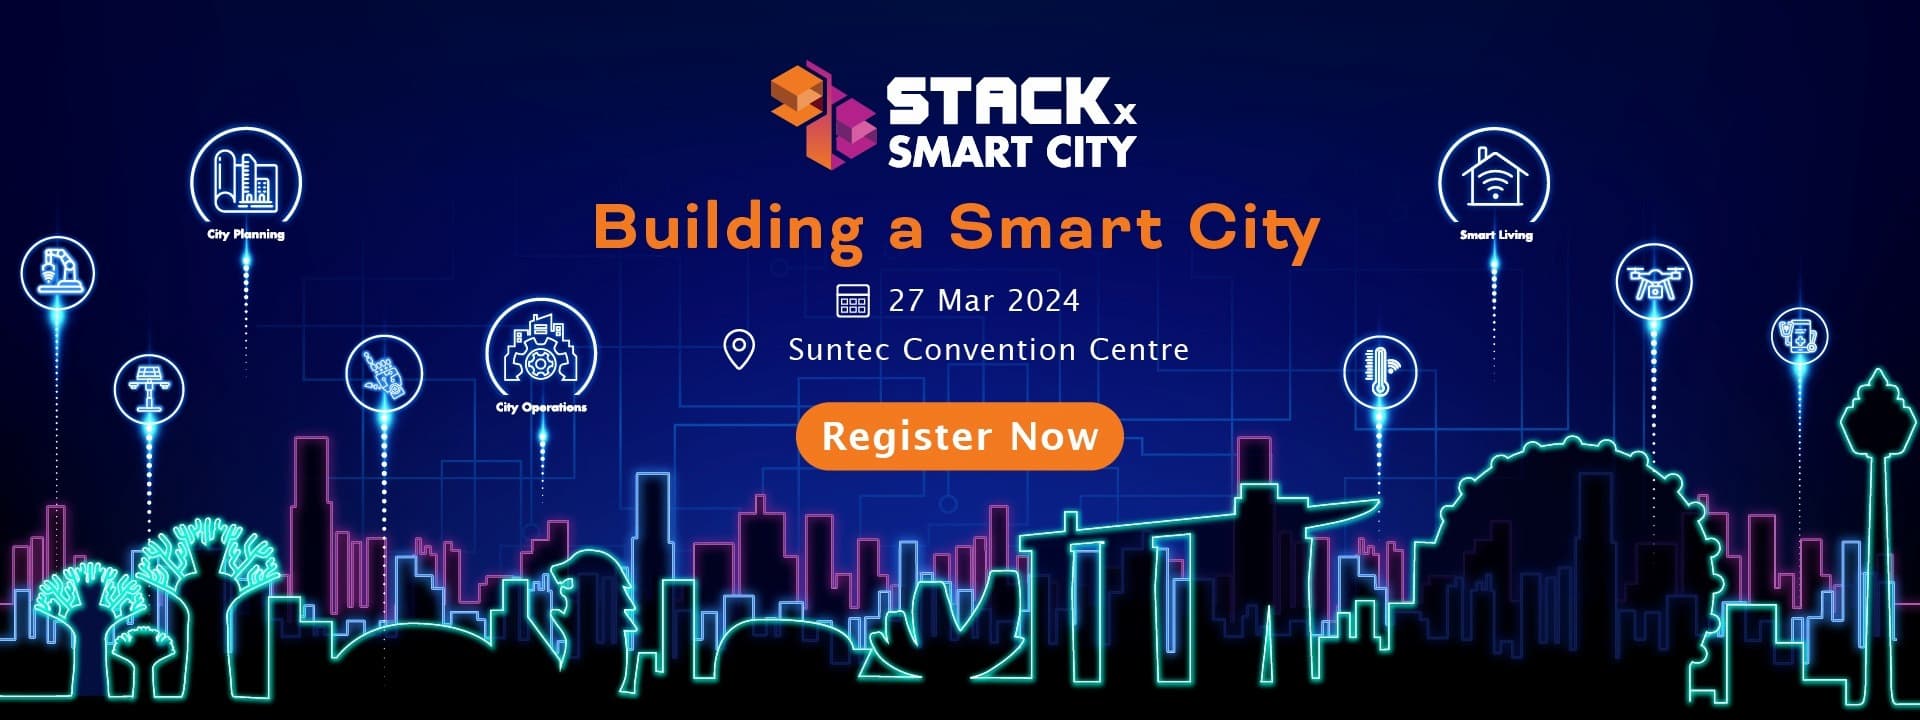 GovTech STACKx Smart City 2024 - insights on future technology, networking and Smart City trends